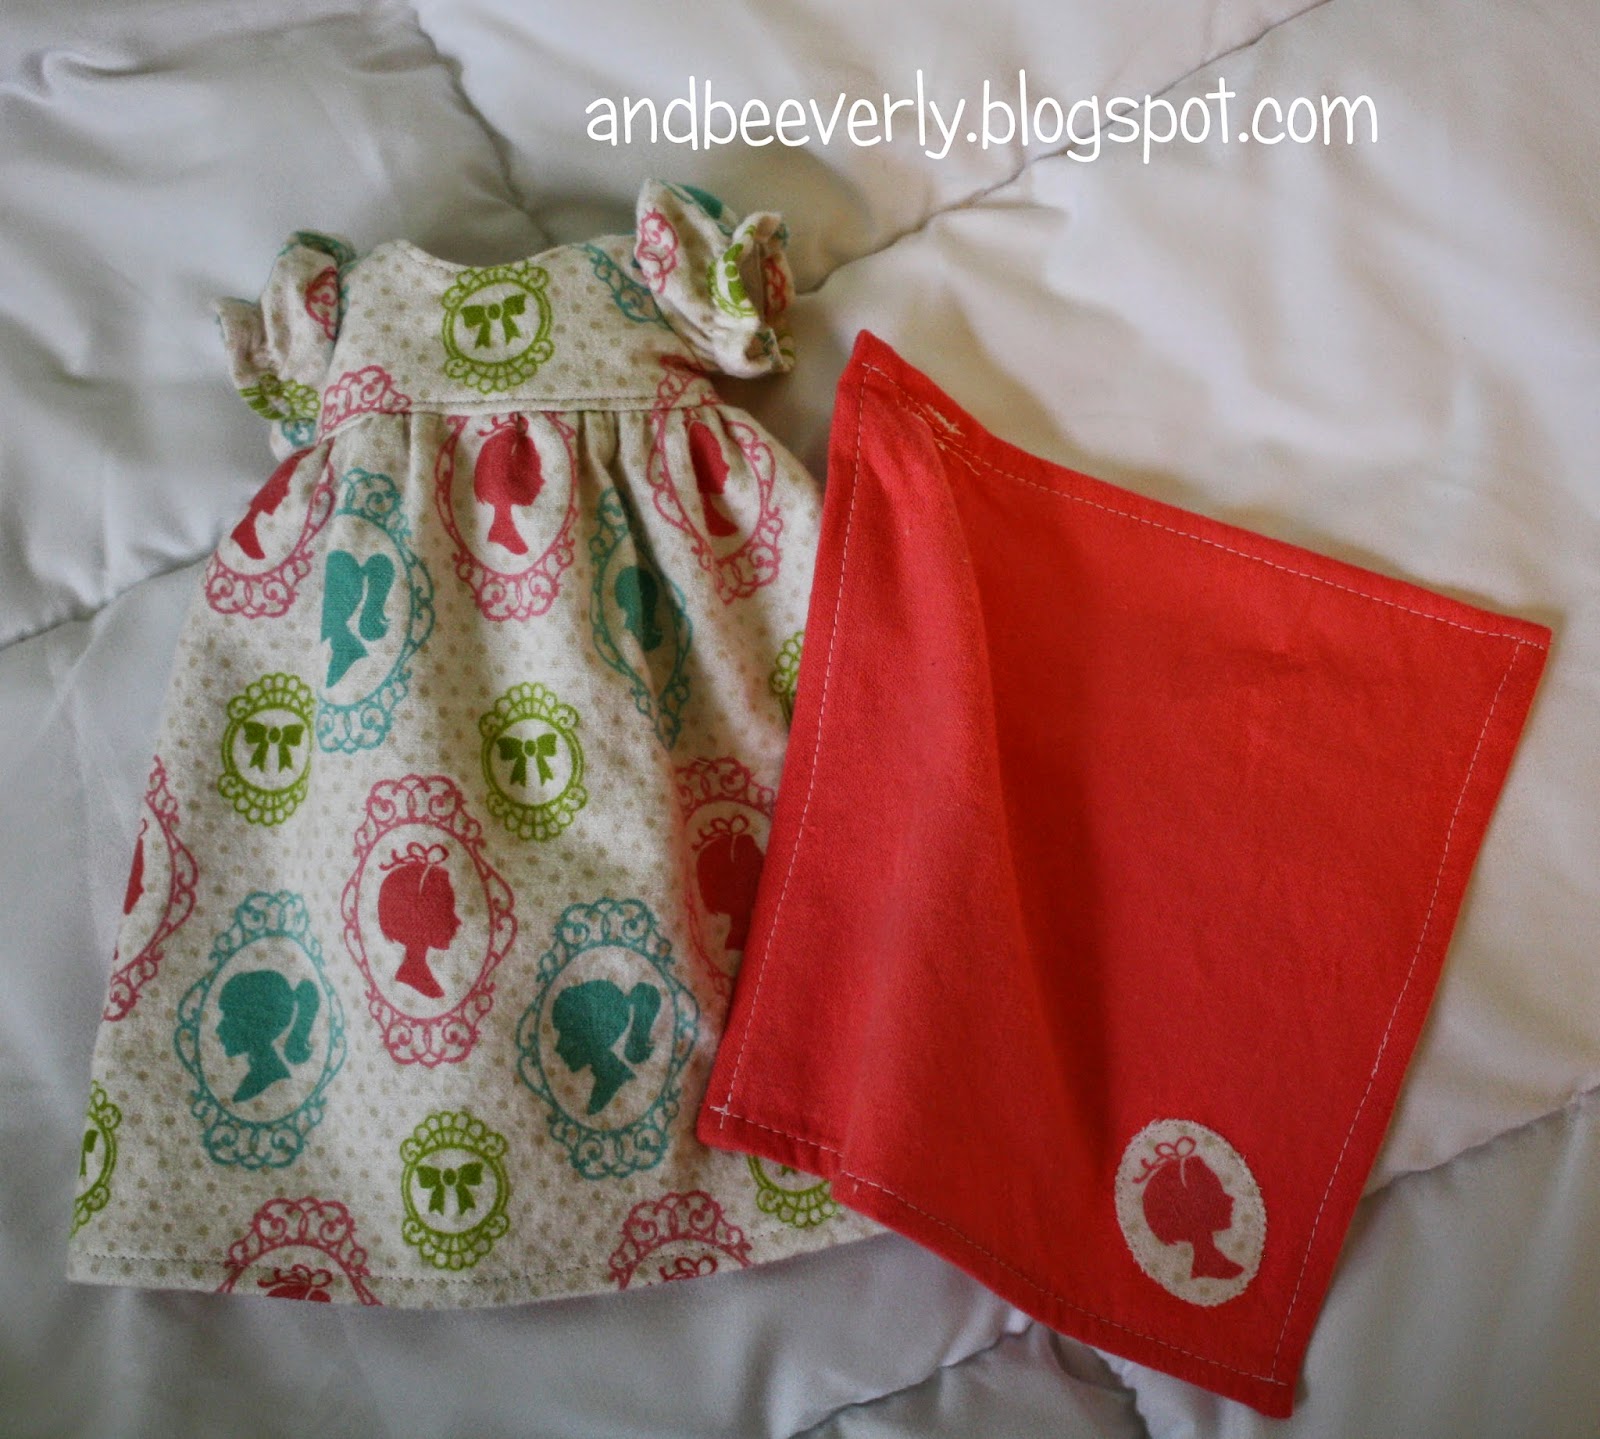 and BE everly: Doll nightgowns!